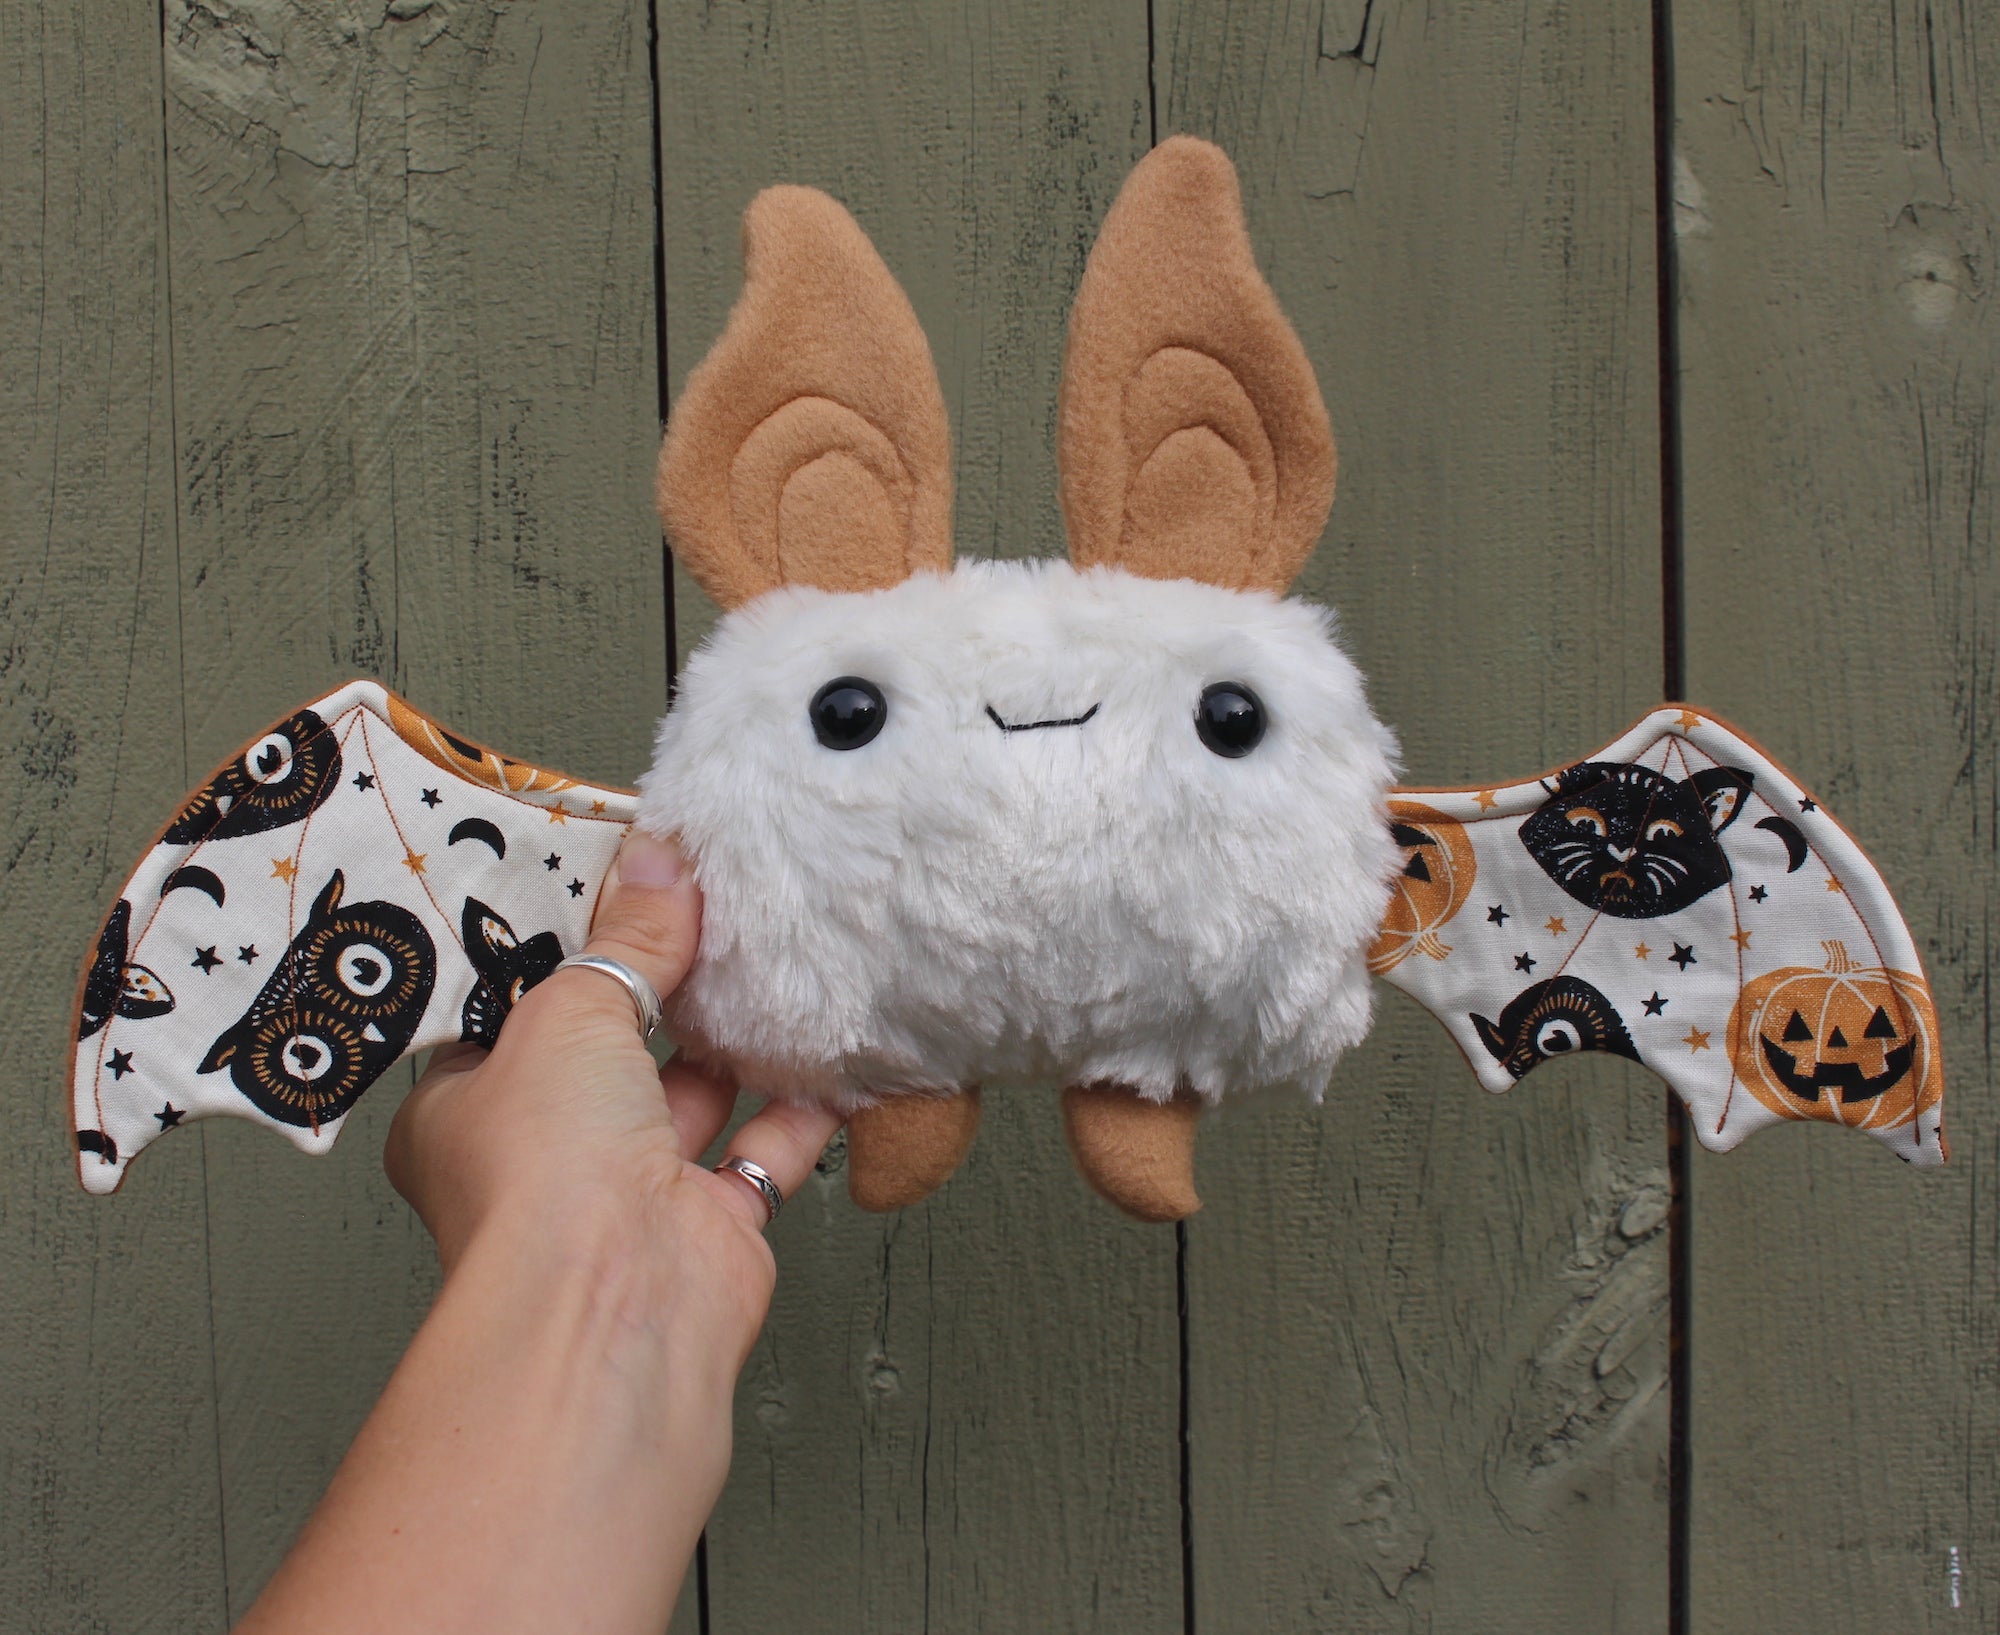 Small White & Tan Bat with Vintage Halloween Wings